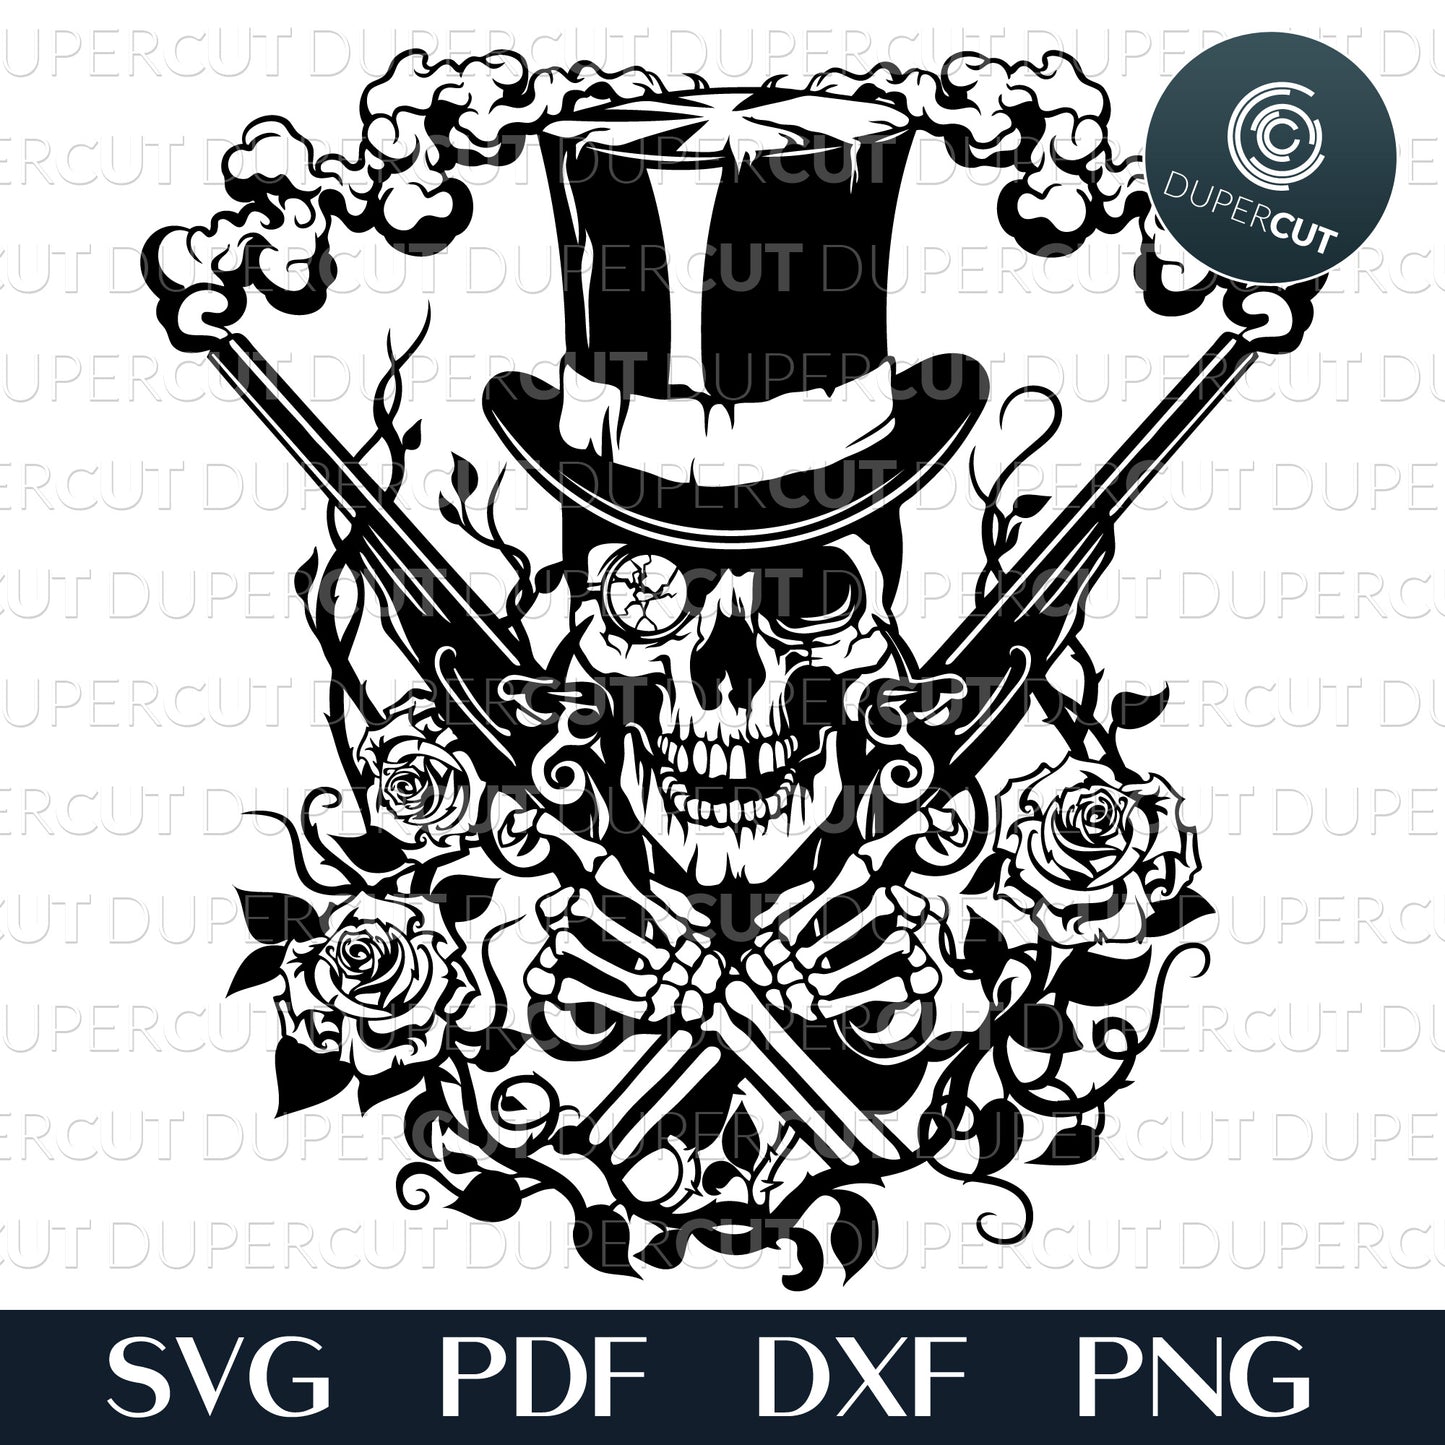 Skull in top hat with pistols and roses. Line art tattoo. Papercutting template for commercial use. SVG files for Silhouette Cameo, Cricut, Glowforge, DXF for CNC, laser cutting, print on demand